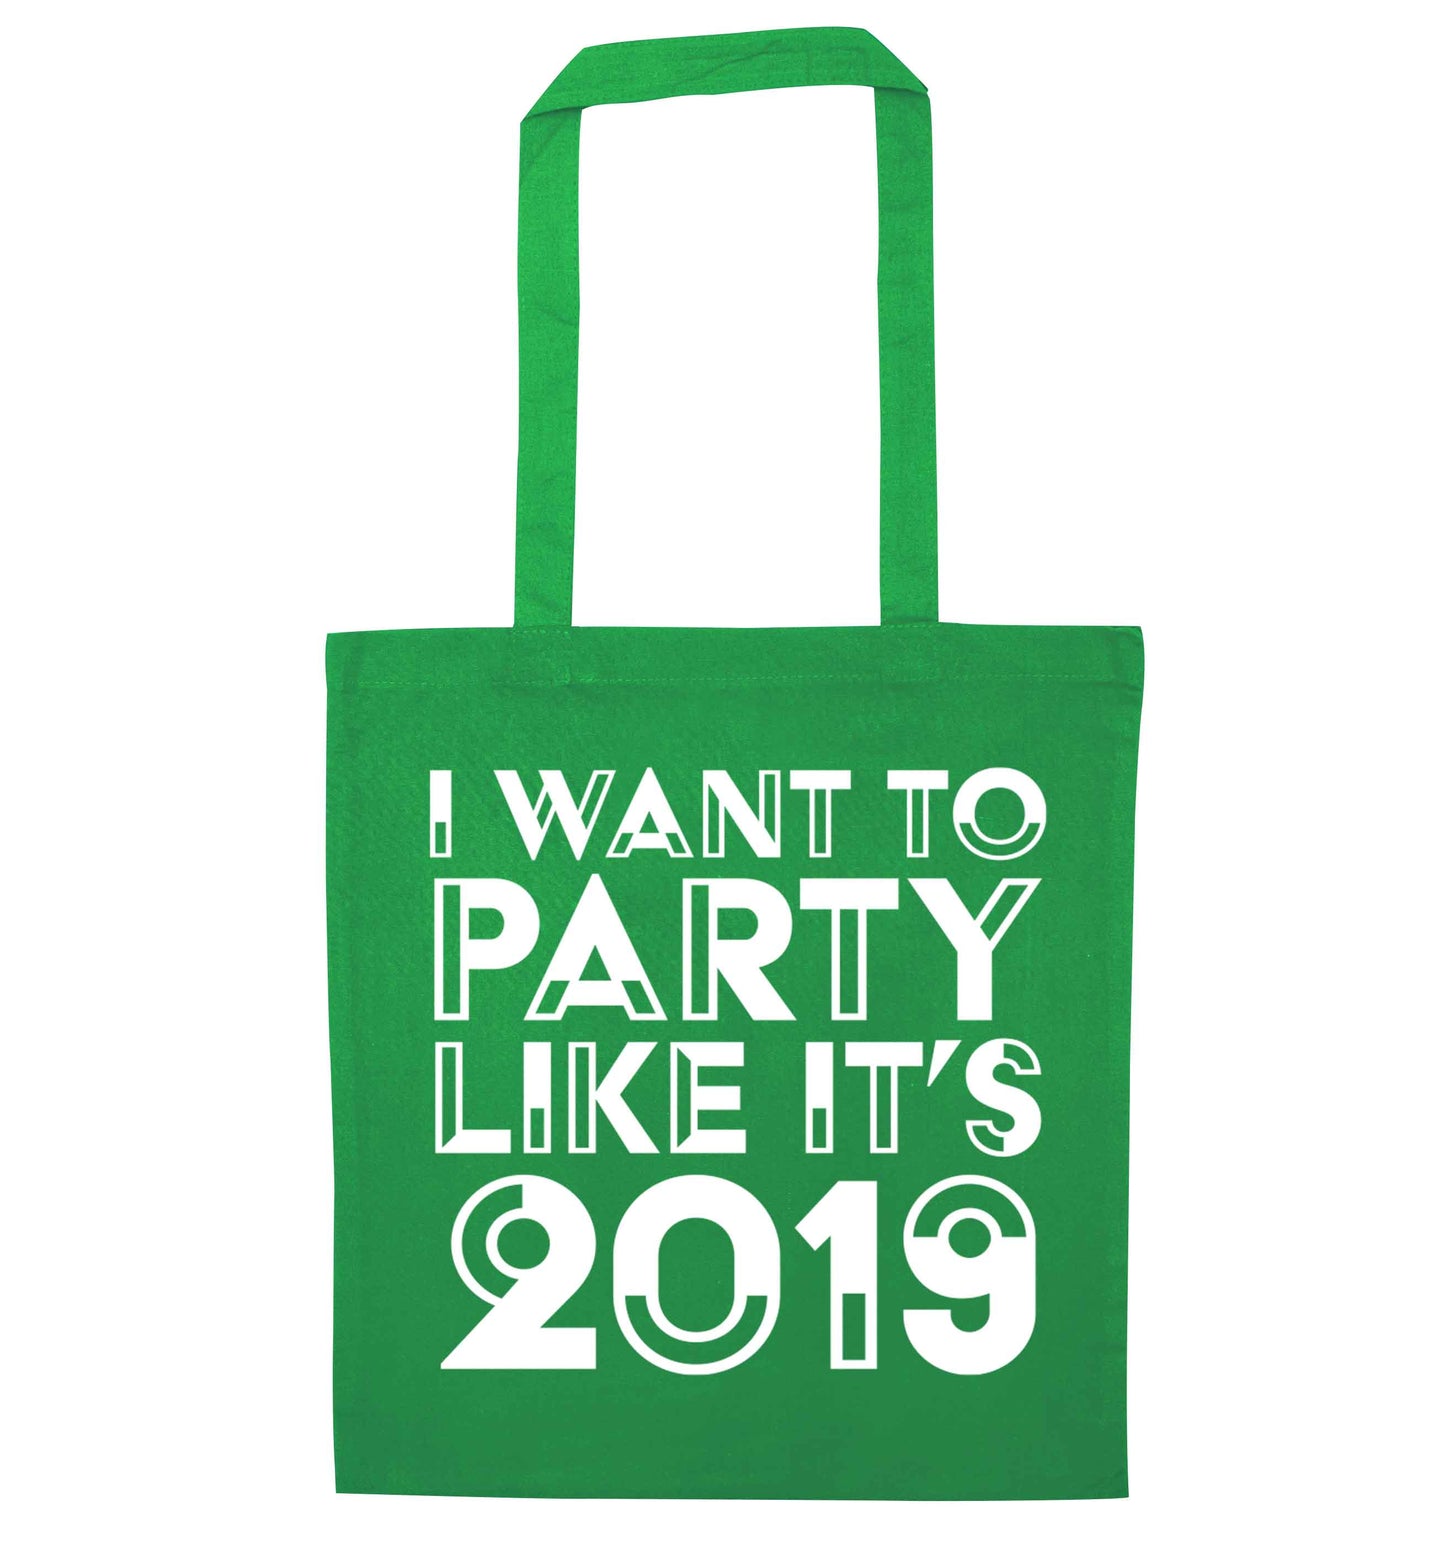 I want to party like it's 2019 green tote bag